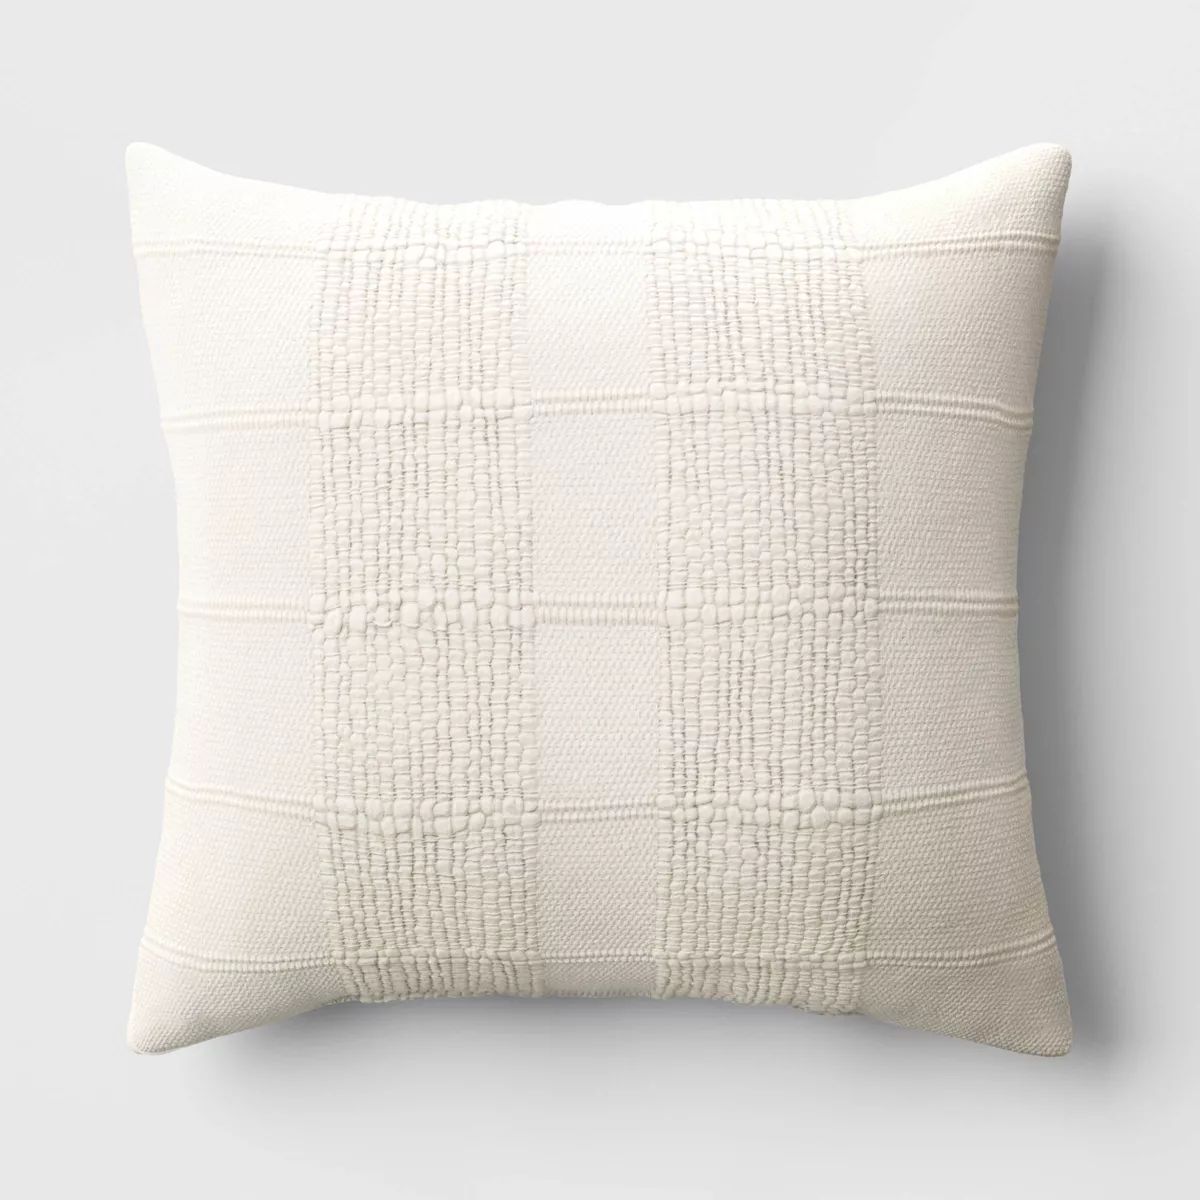 Textural Solid Square Throw Pillow Off-White - Threshold™ | Target